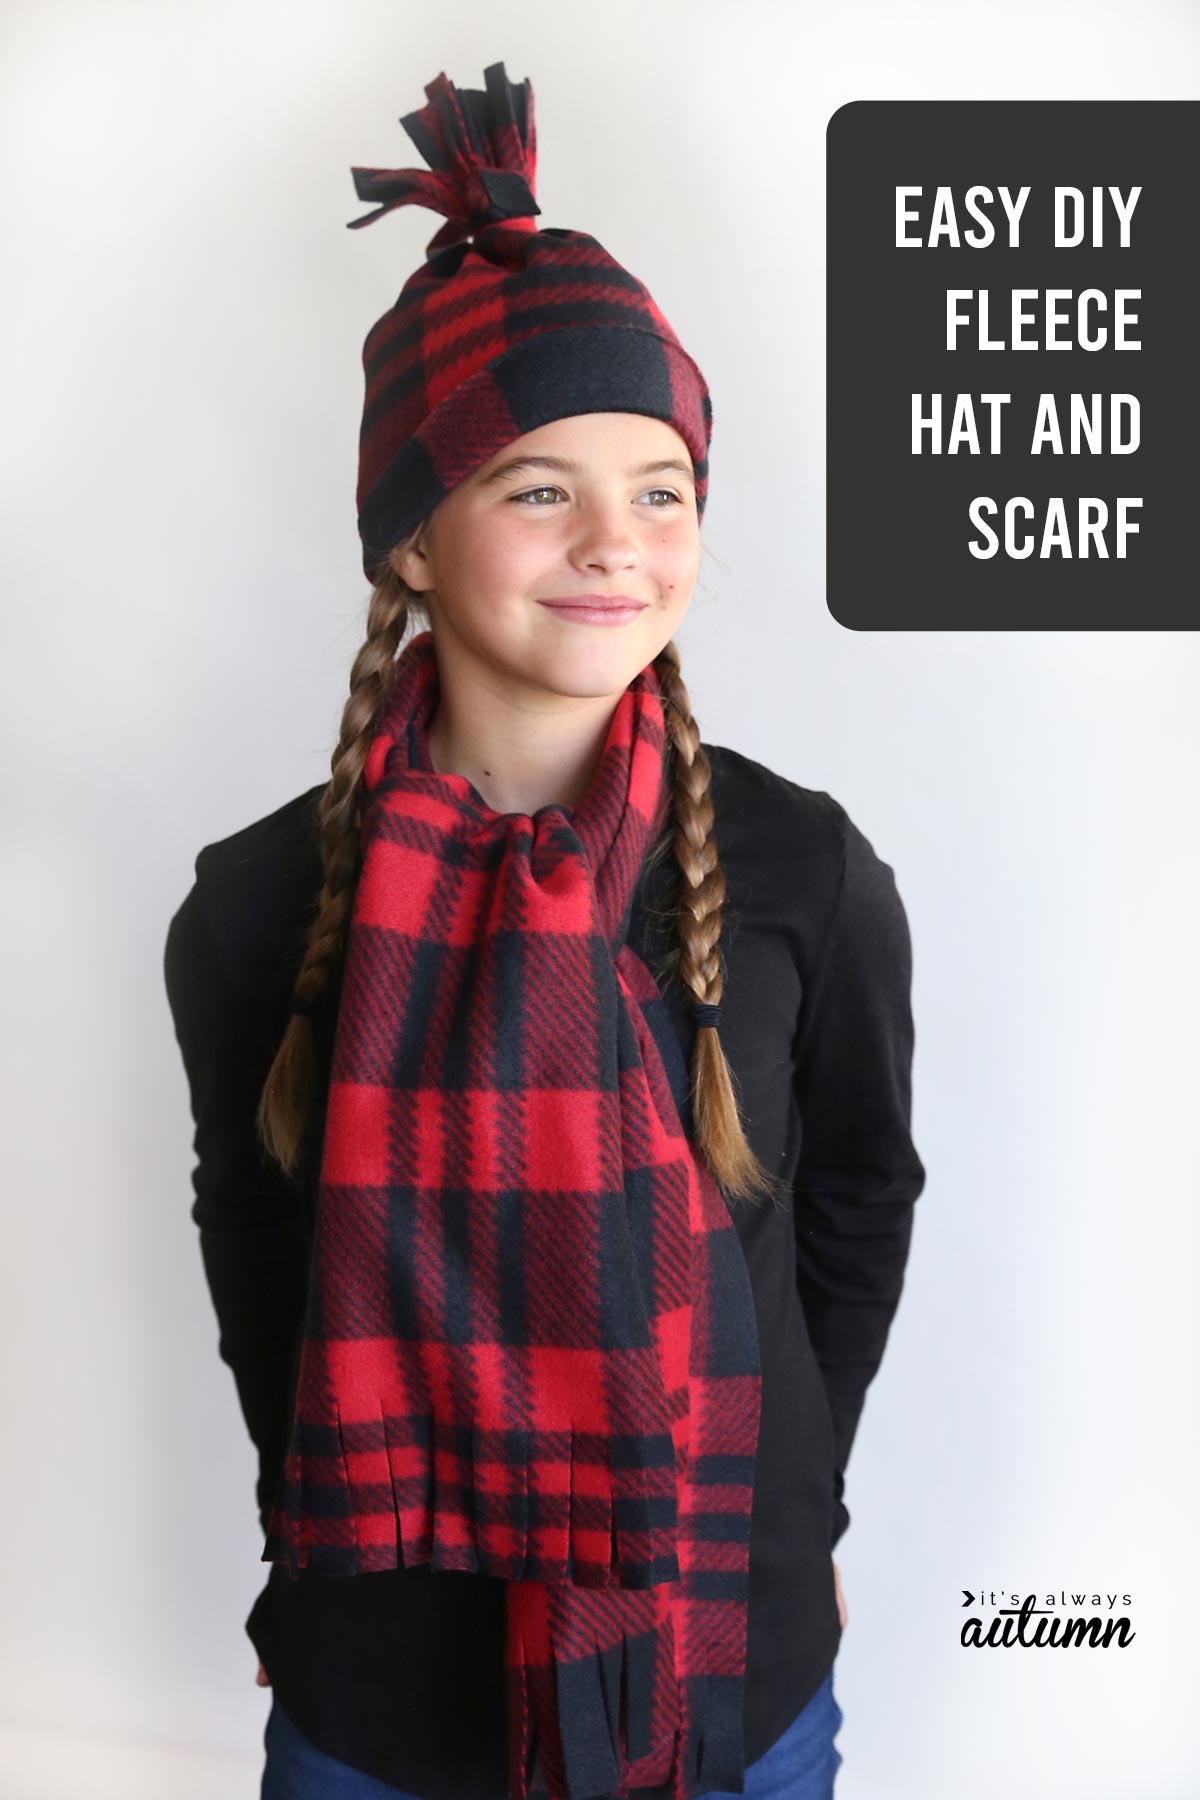 You can make this adorable fleece hat and scarf set in under 20 minutes!